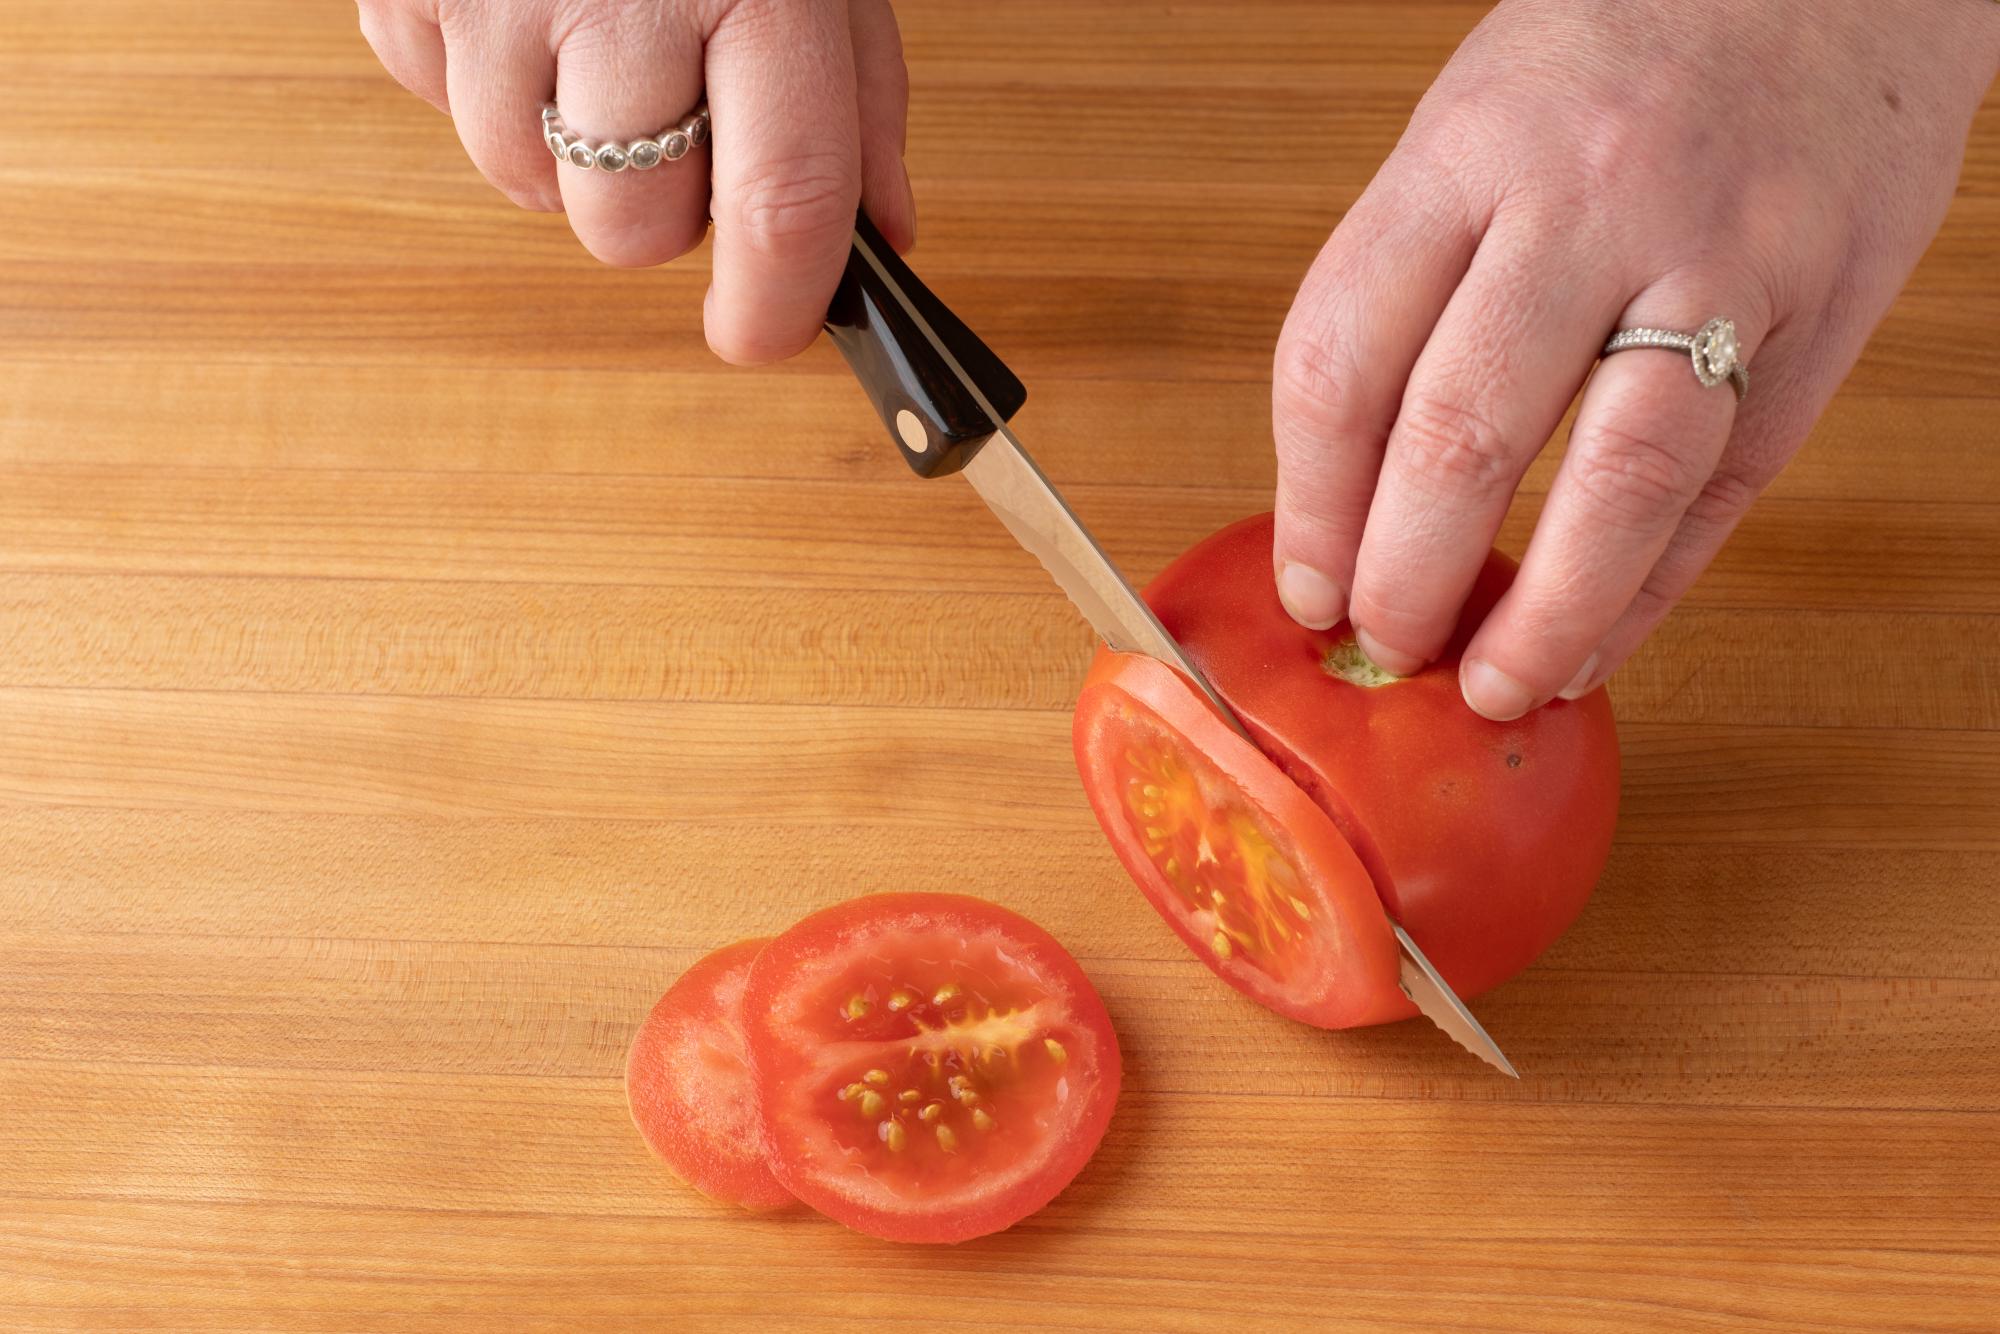 Slicing tomato with a trimmer.